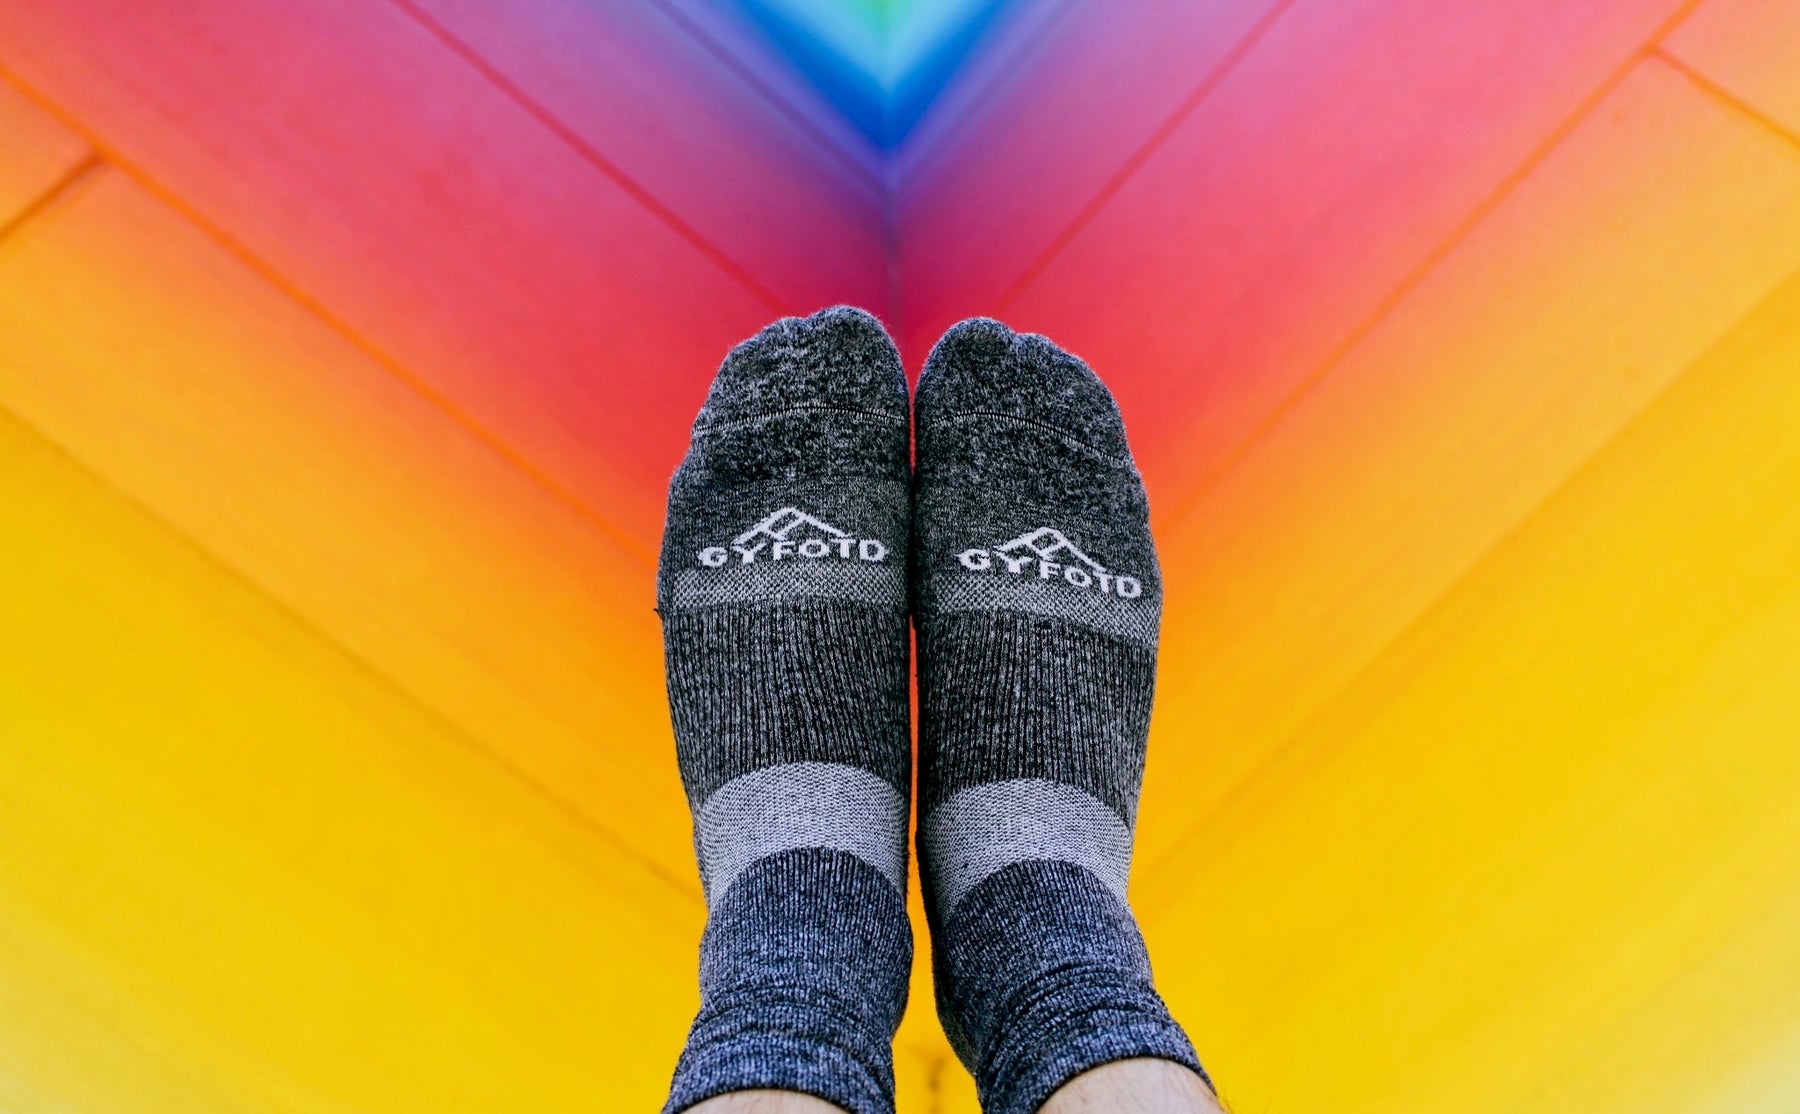 Crew length socks with colorful background.